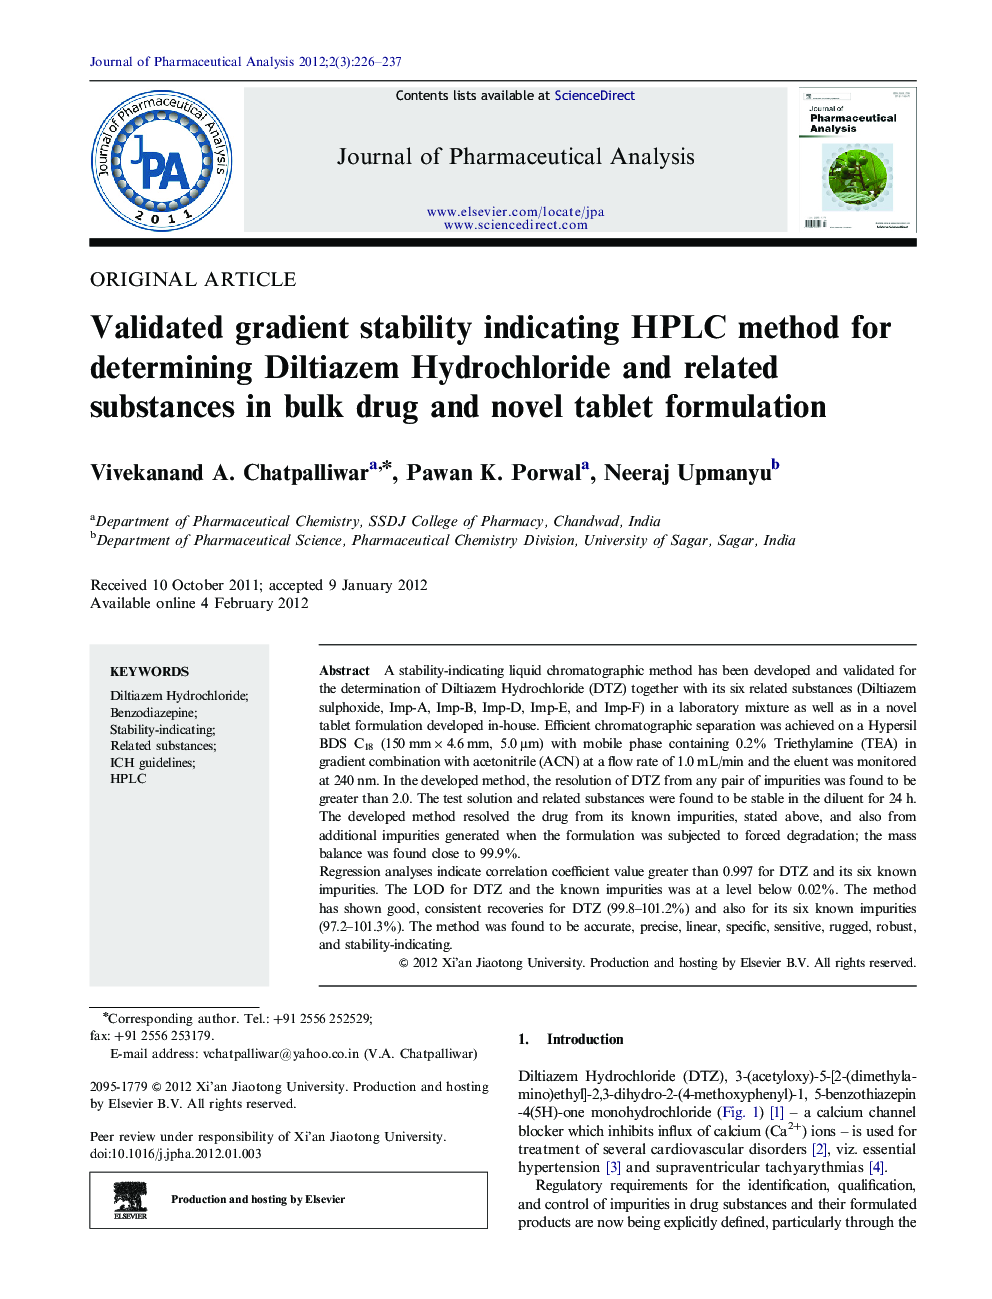 Validated gradient stability indicating HPLC method for determining Diltiazem Hydrochloride and related substances in bulk drug and novel tablet formulation